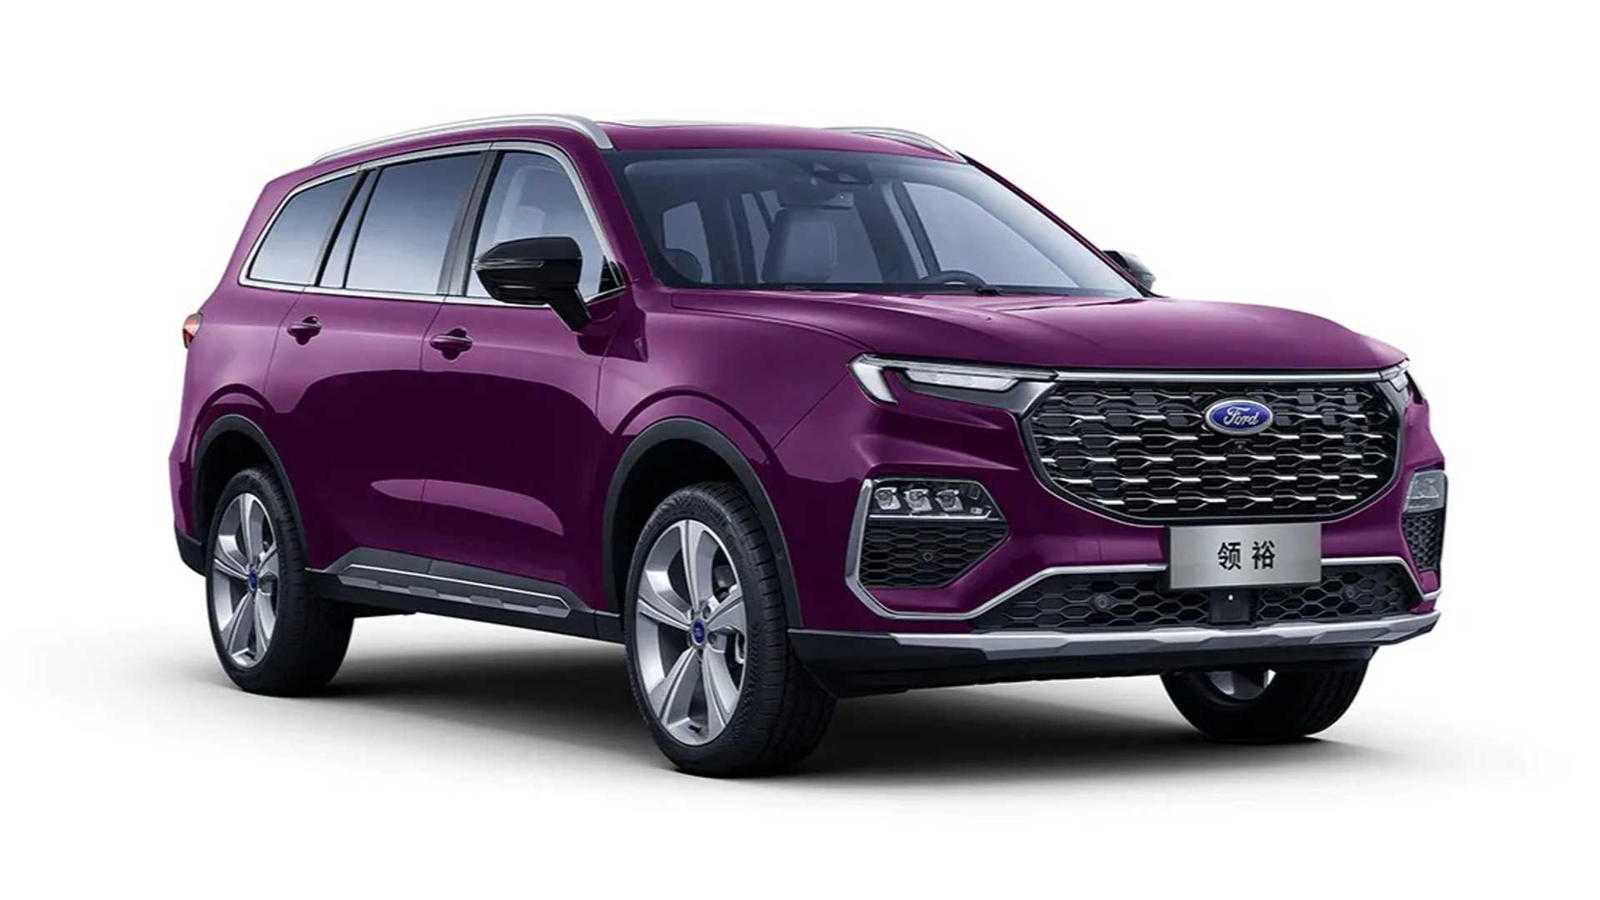 Meet The New Large Luxury SUV Dubbed Ford Equator In Purple